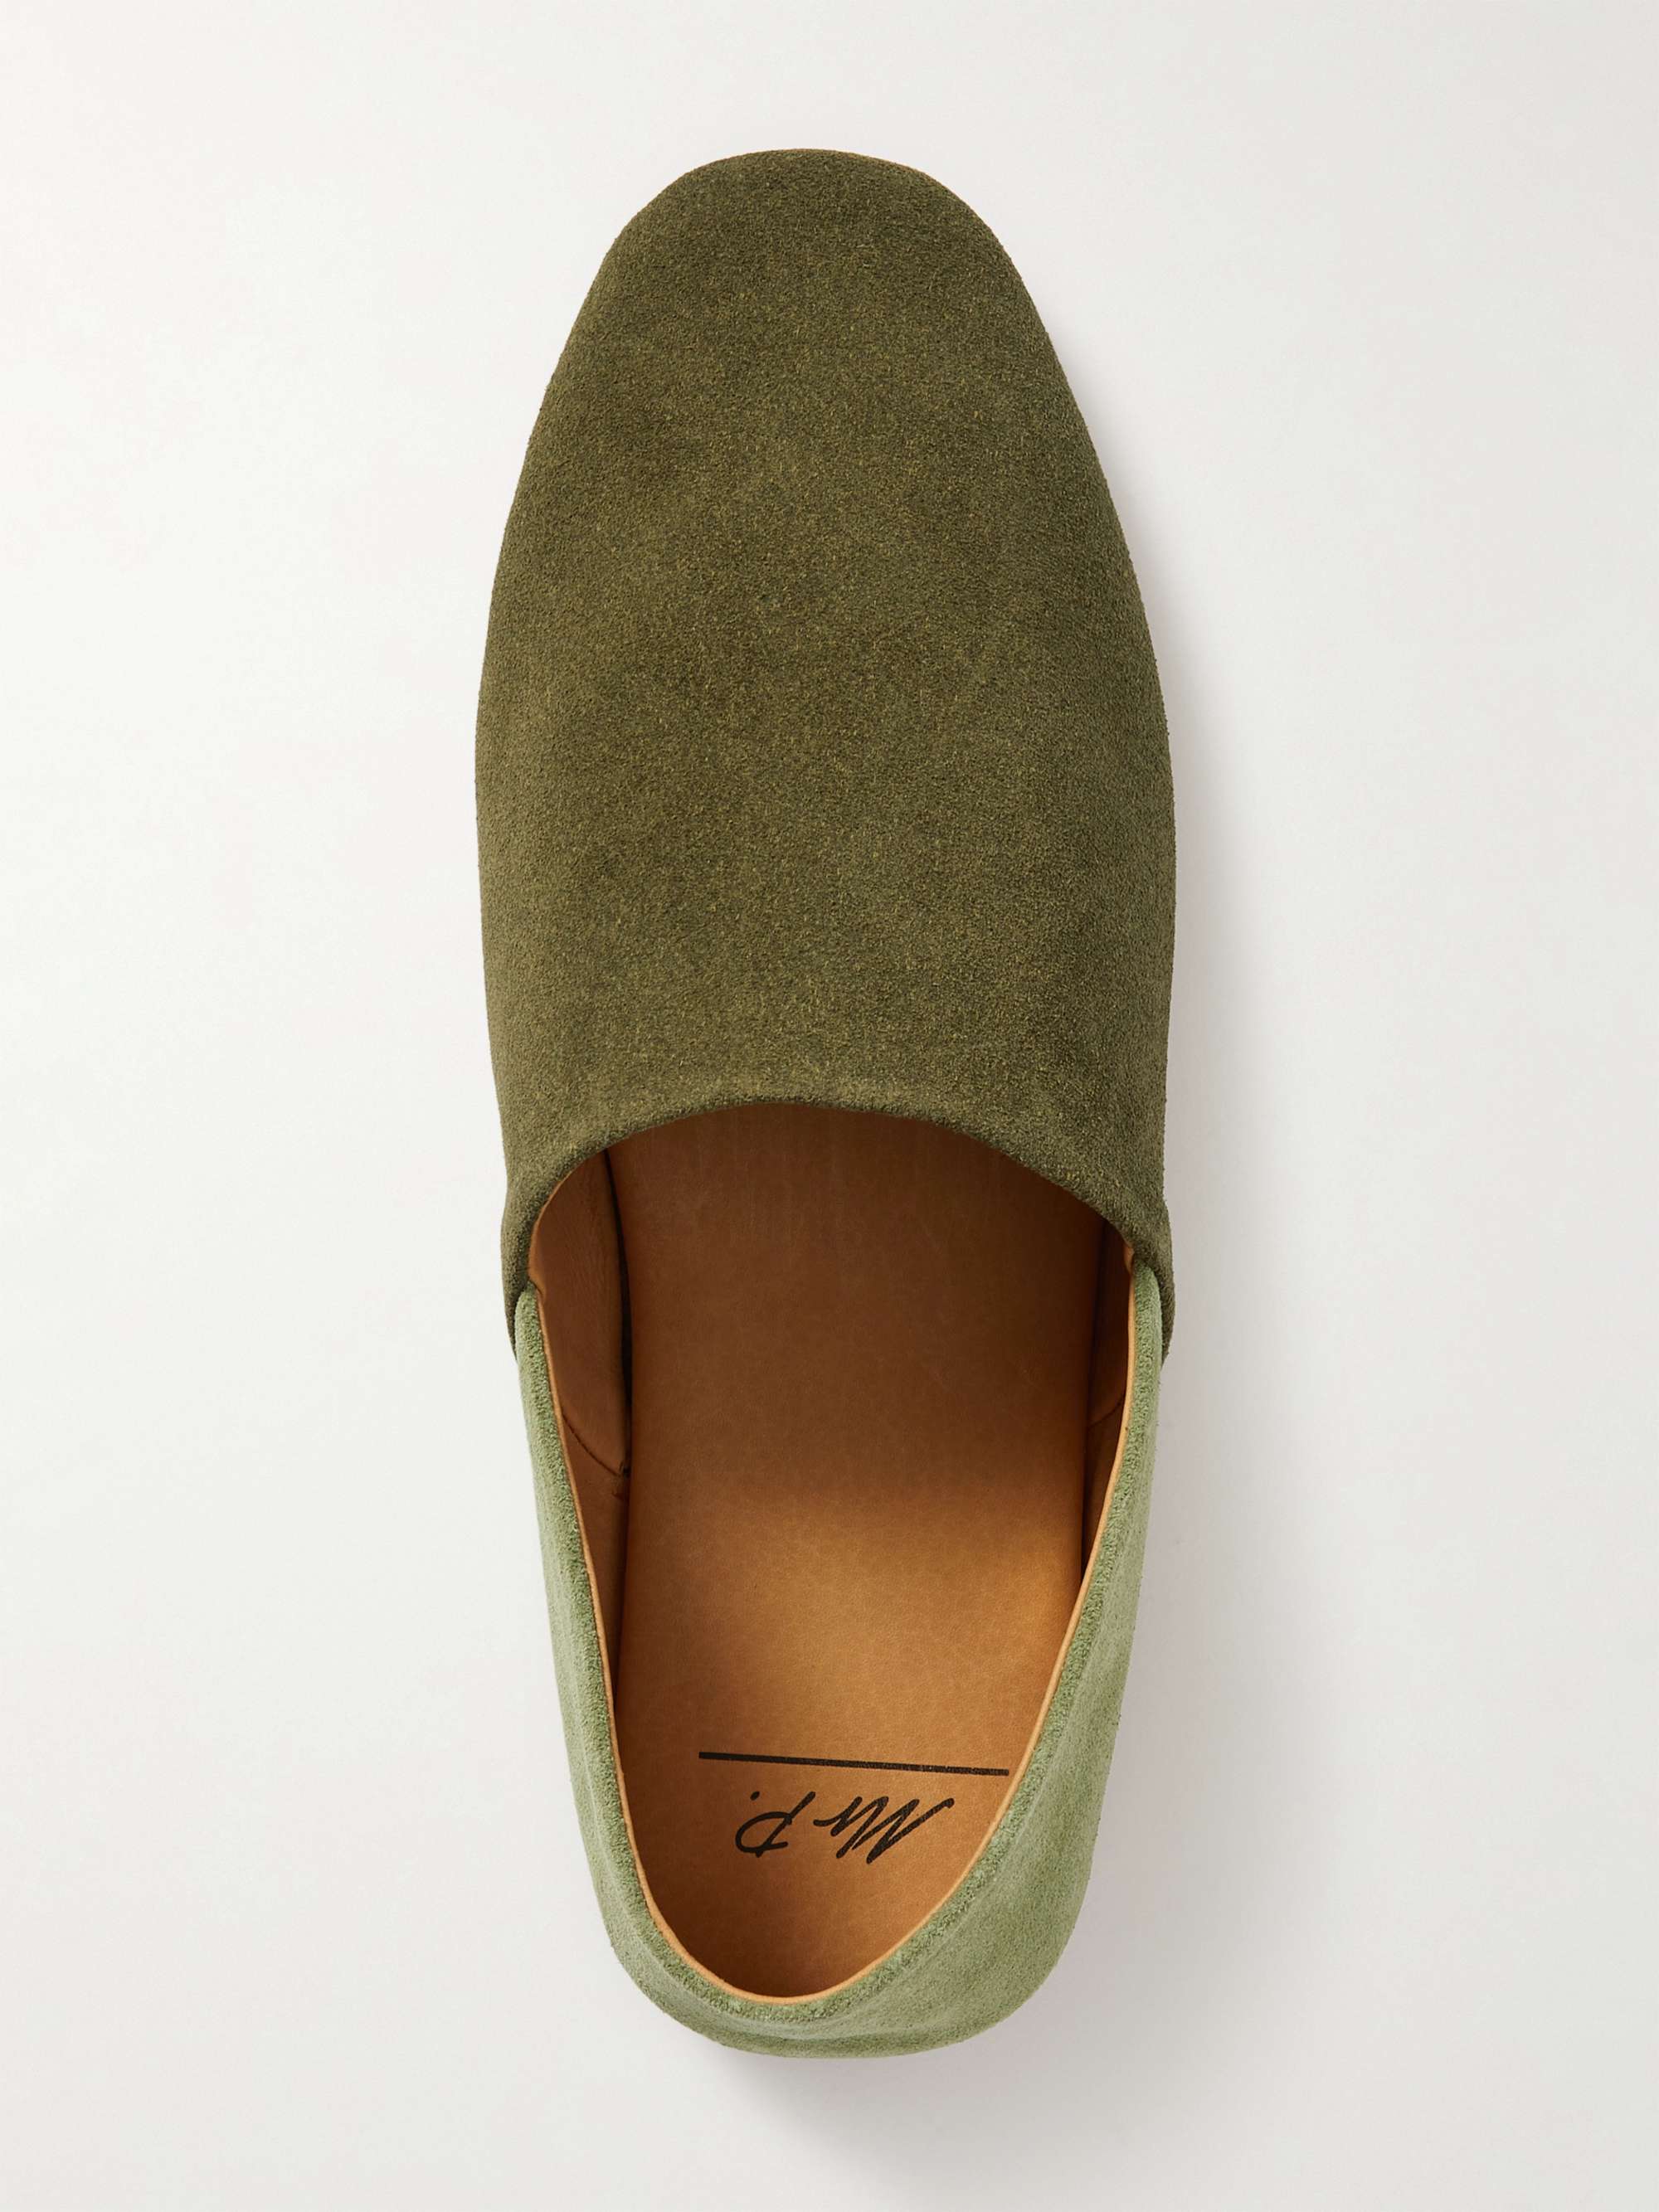 MR P. Collapsible-Heel Two-Tone Suede Travel Slippers